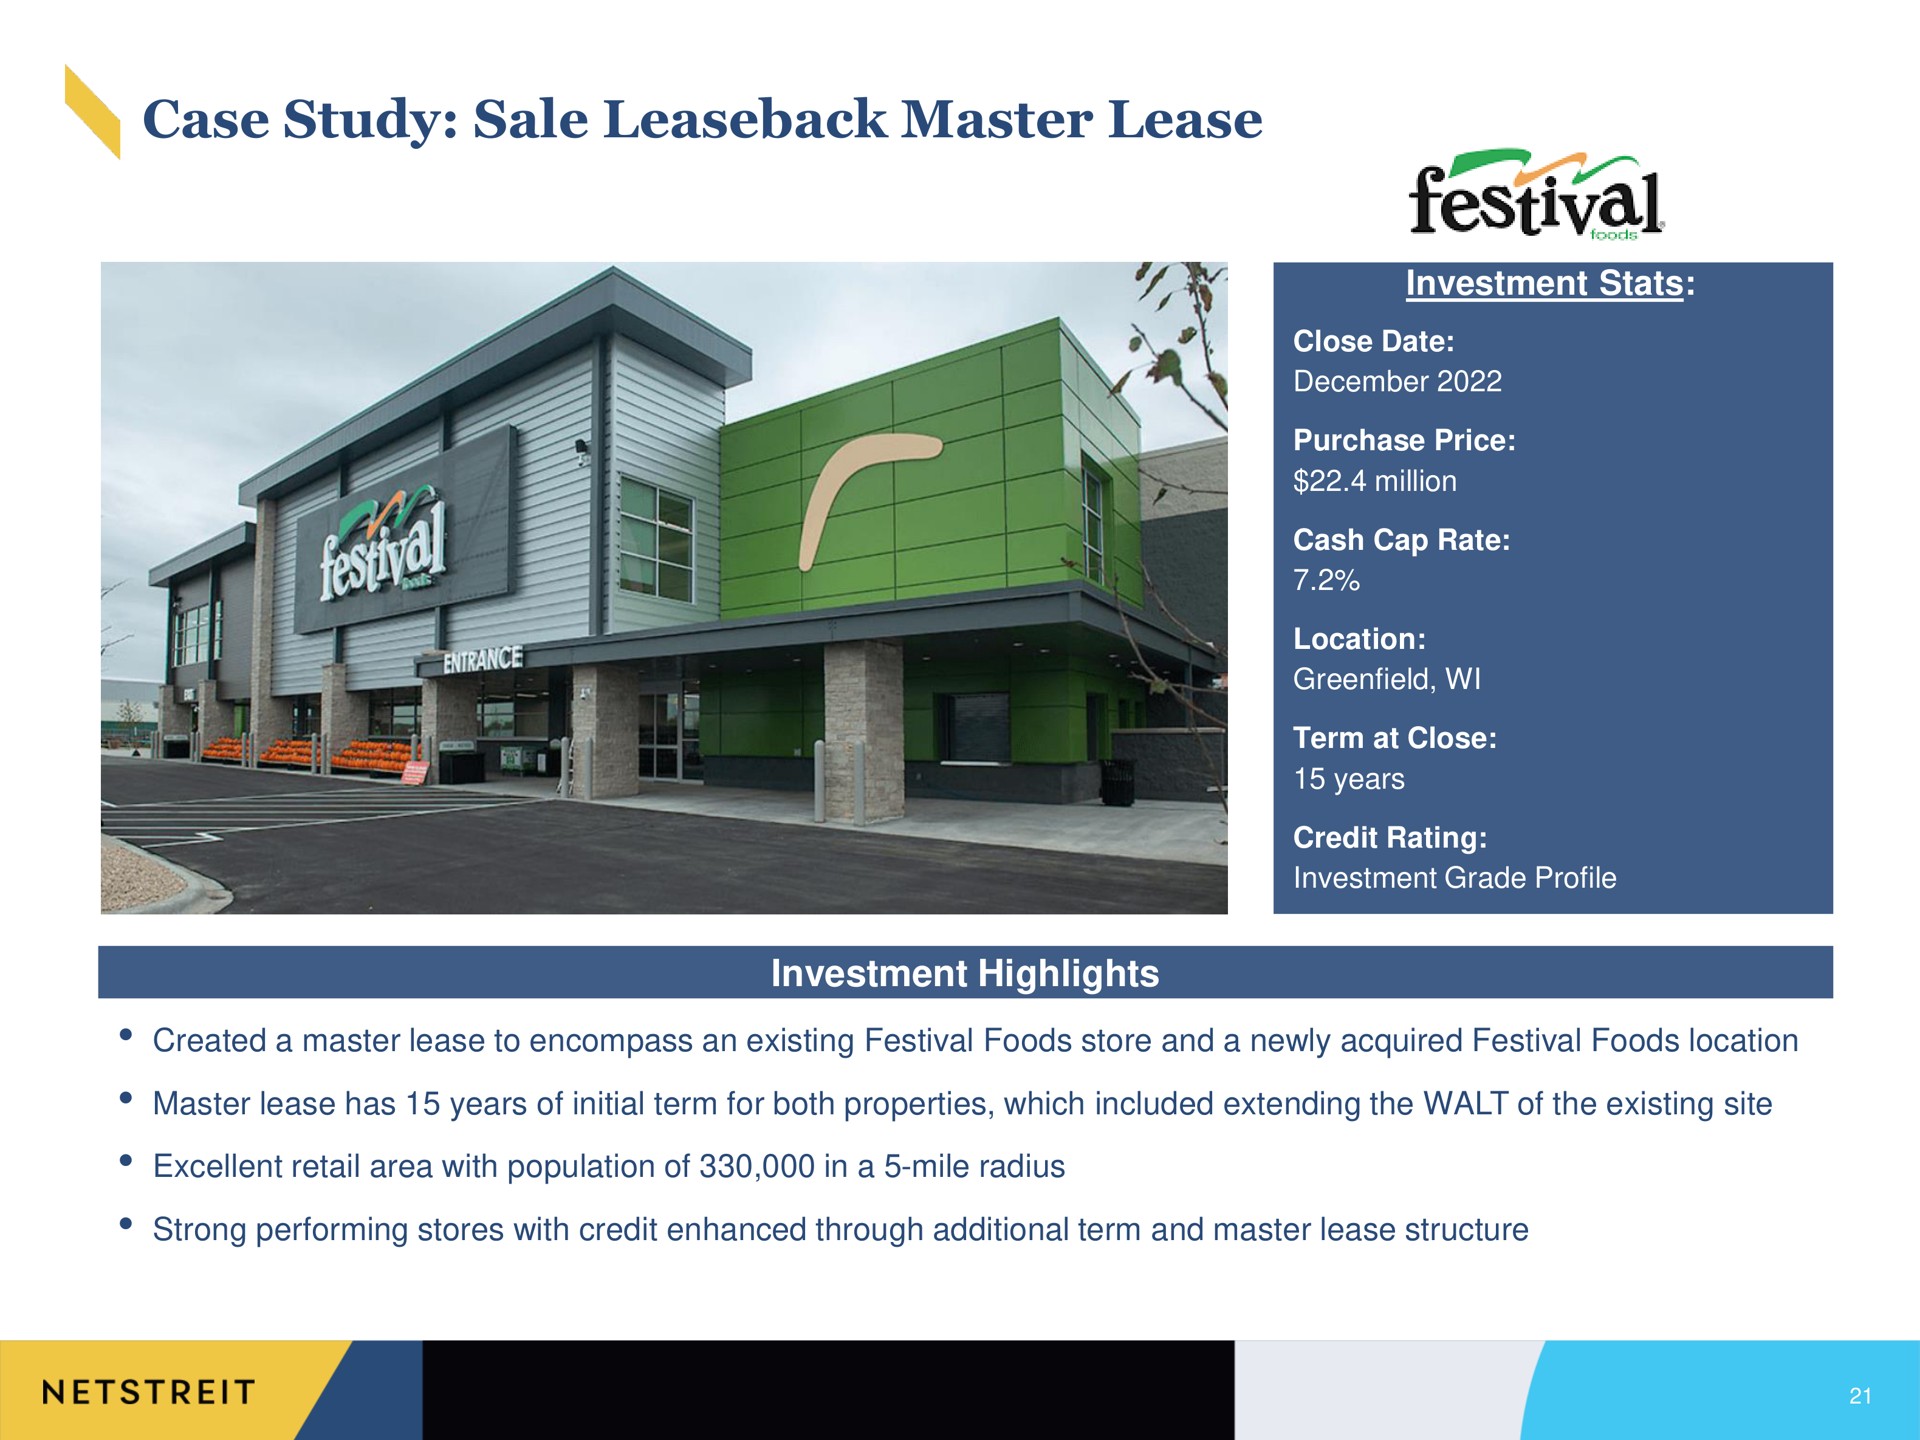 case study sale master lease investment investment highlights is festival | Netstreit